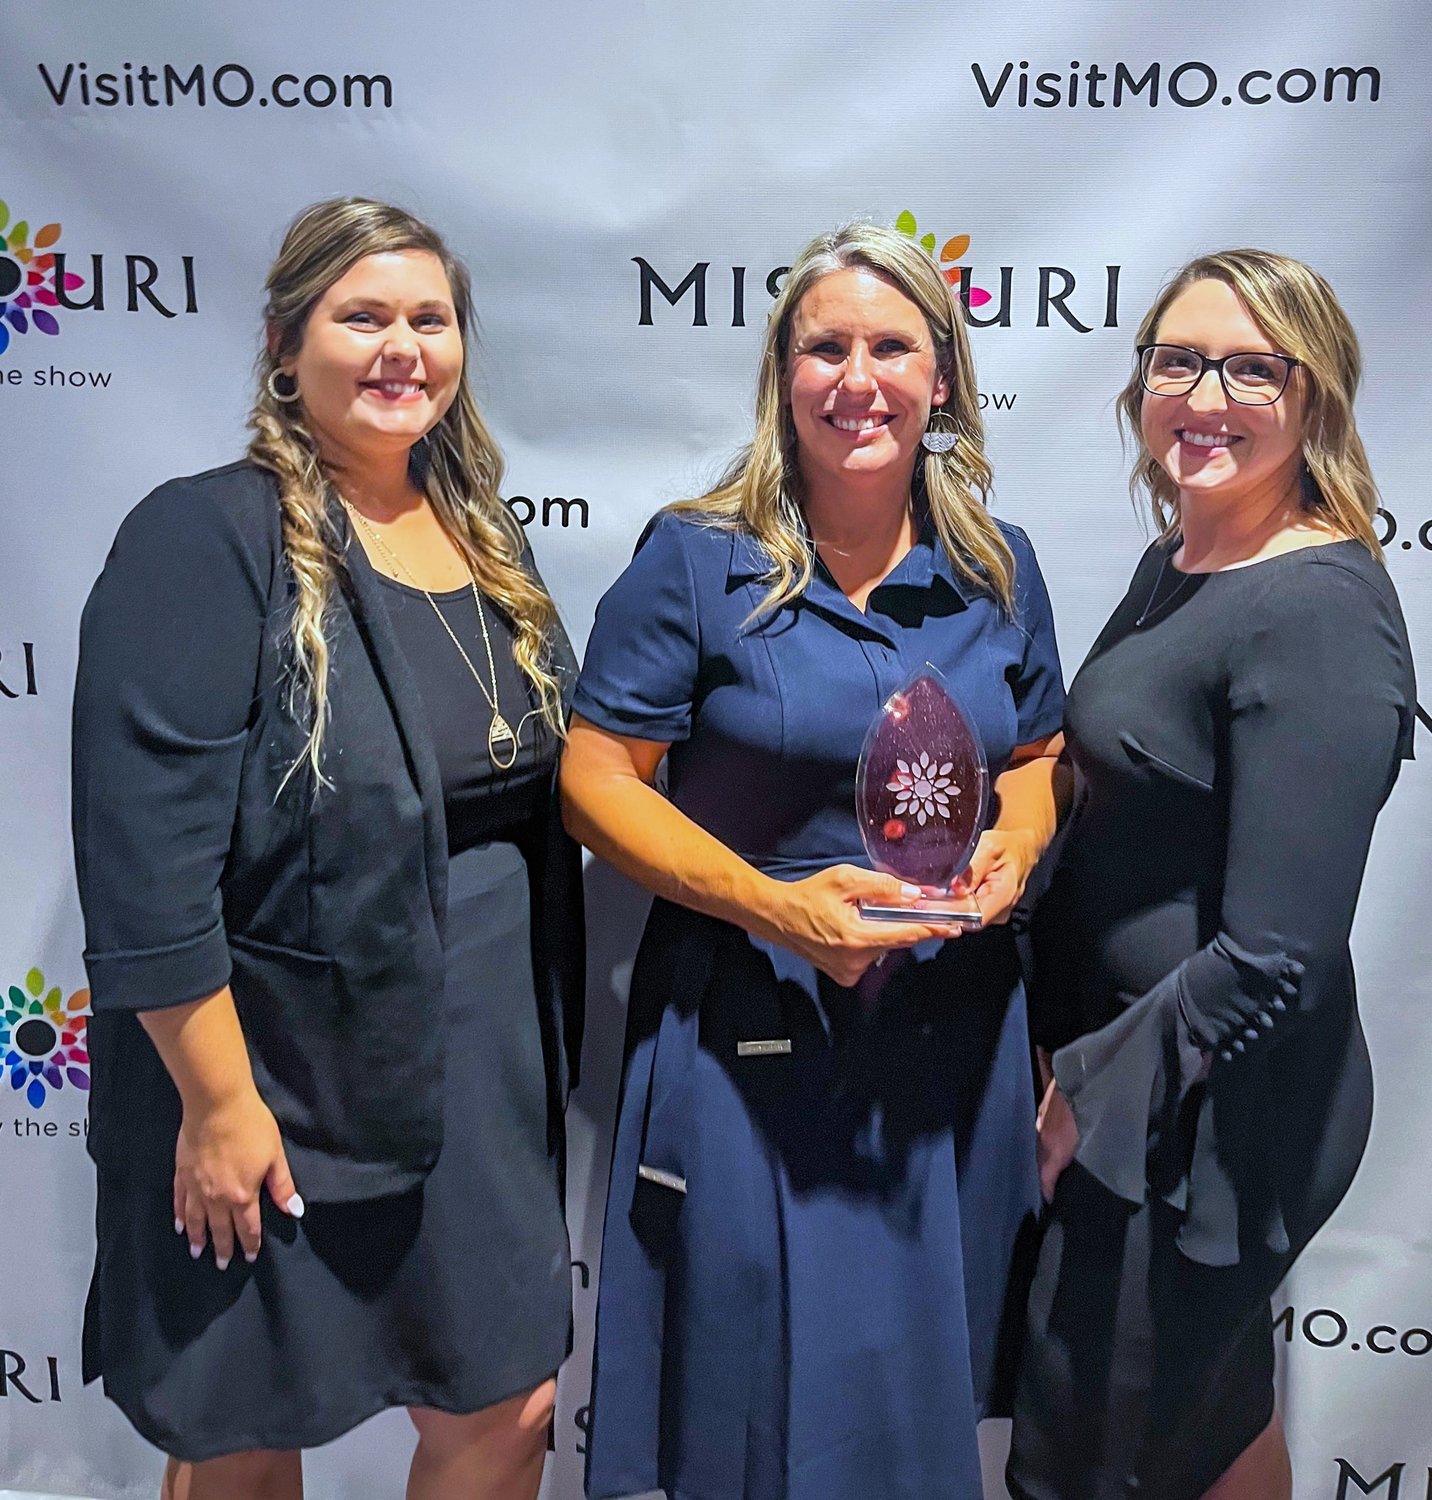 Accepting the Innovator Award last week are Tourism Specialist Michelle Greenwell, Moberly Area Chamber of Commerce Executive Director Megan Schmitt and Administrative Assistant Ashley Nolte.